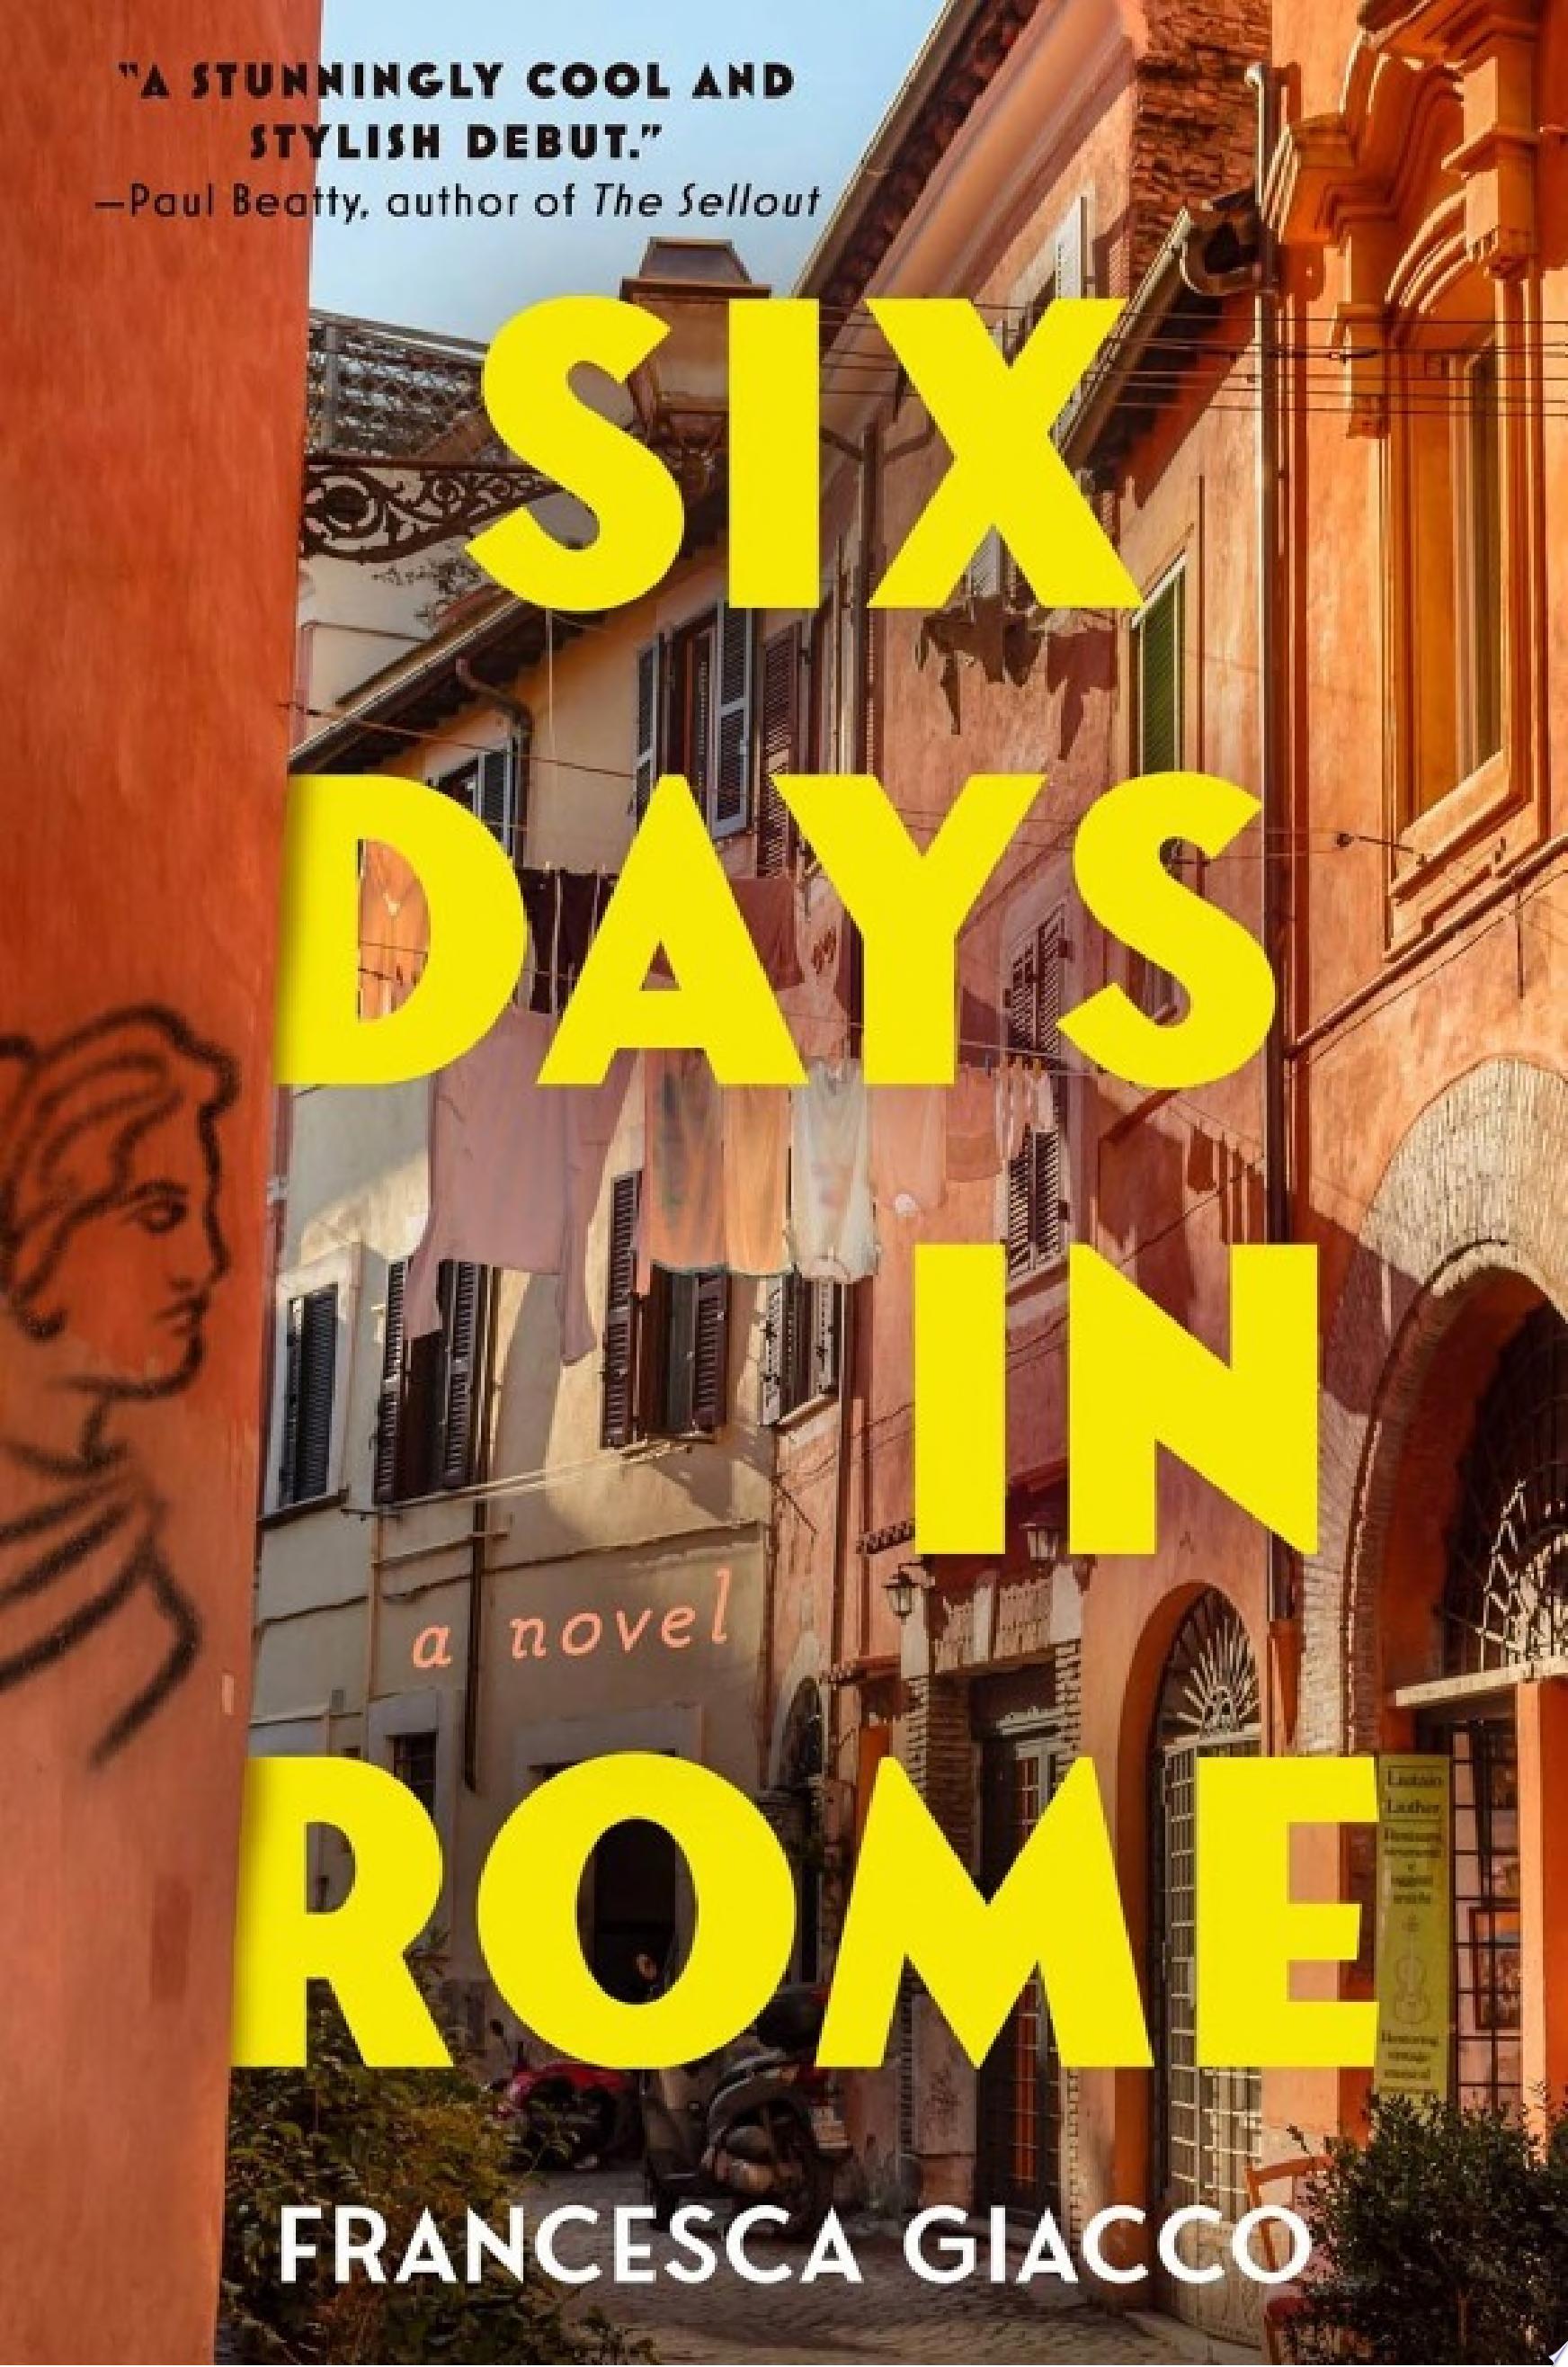 Image for "Six Days in Rome"